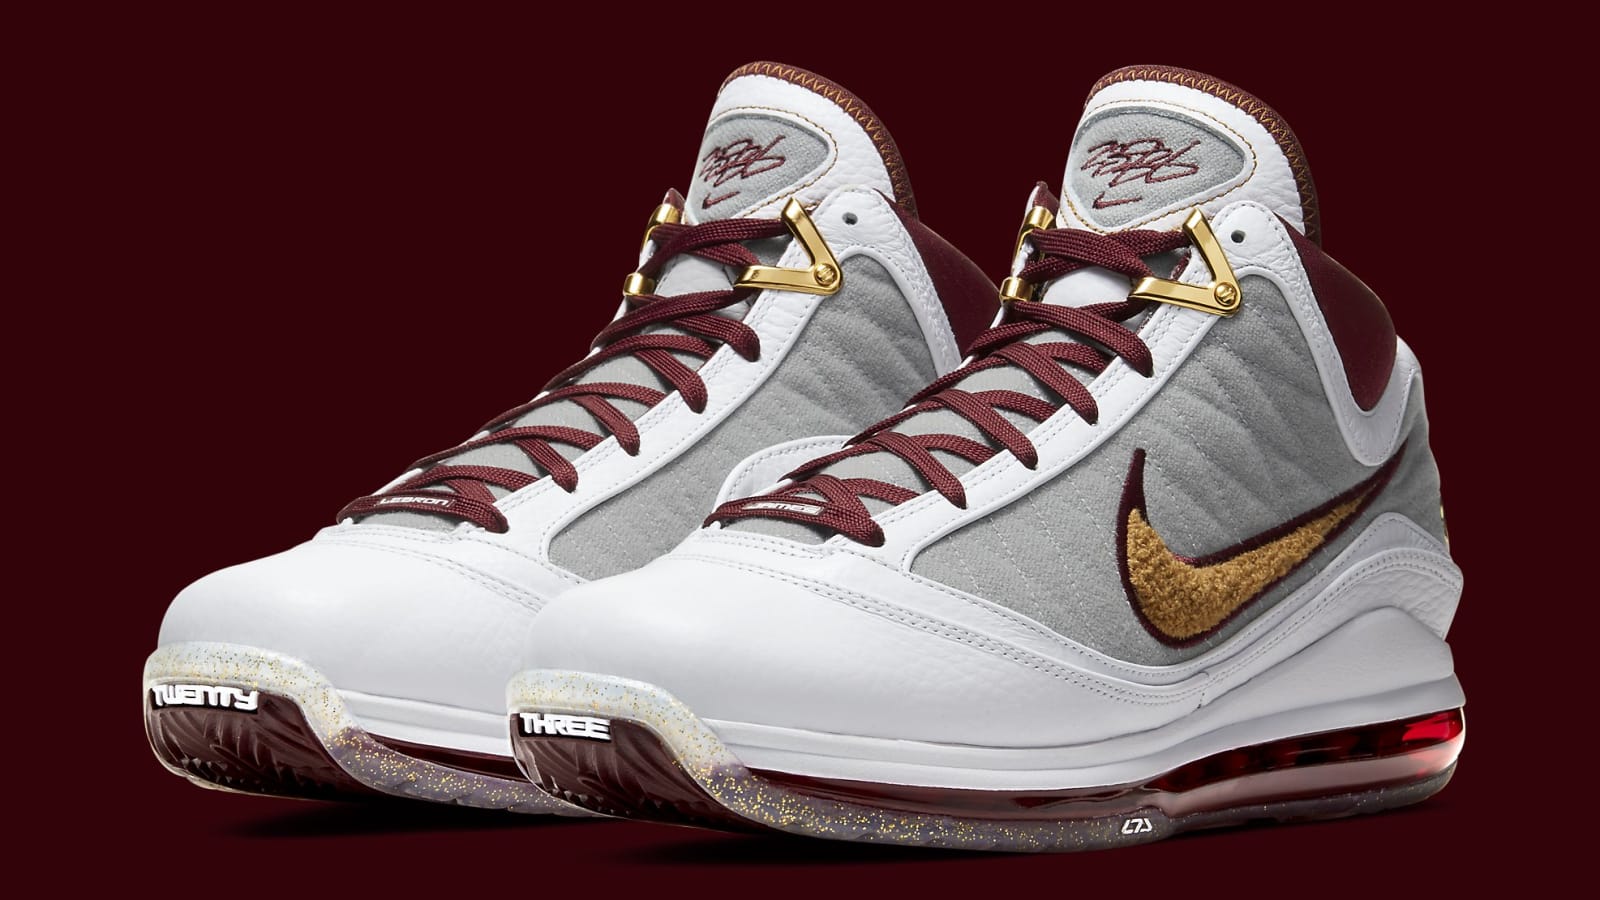 Nike LeBron 7 &quot;MVP&quot; Coming Soon: Official Images